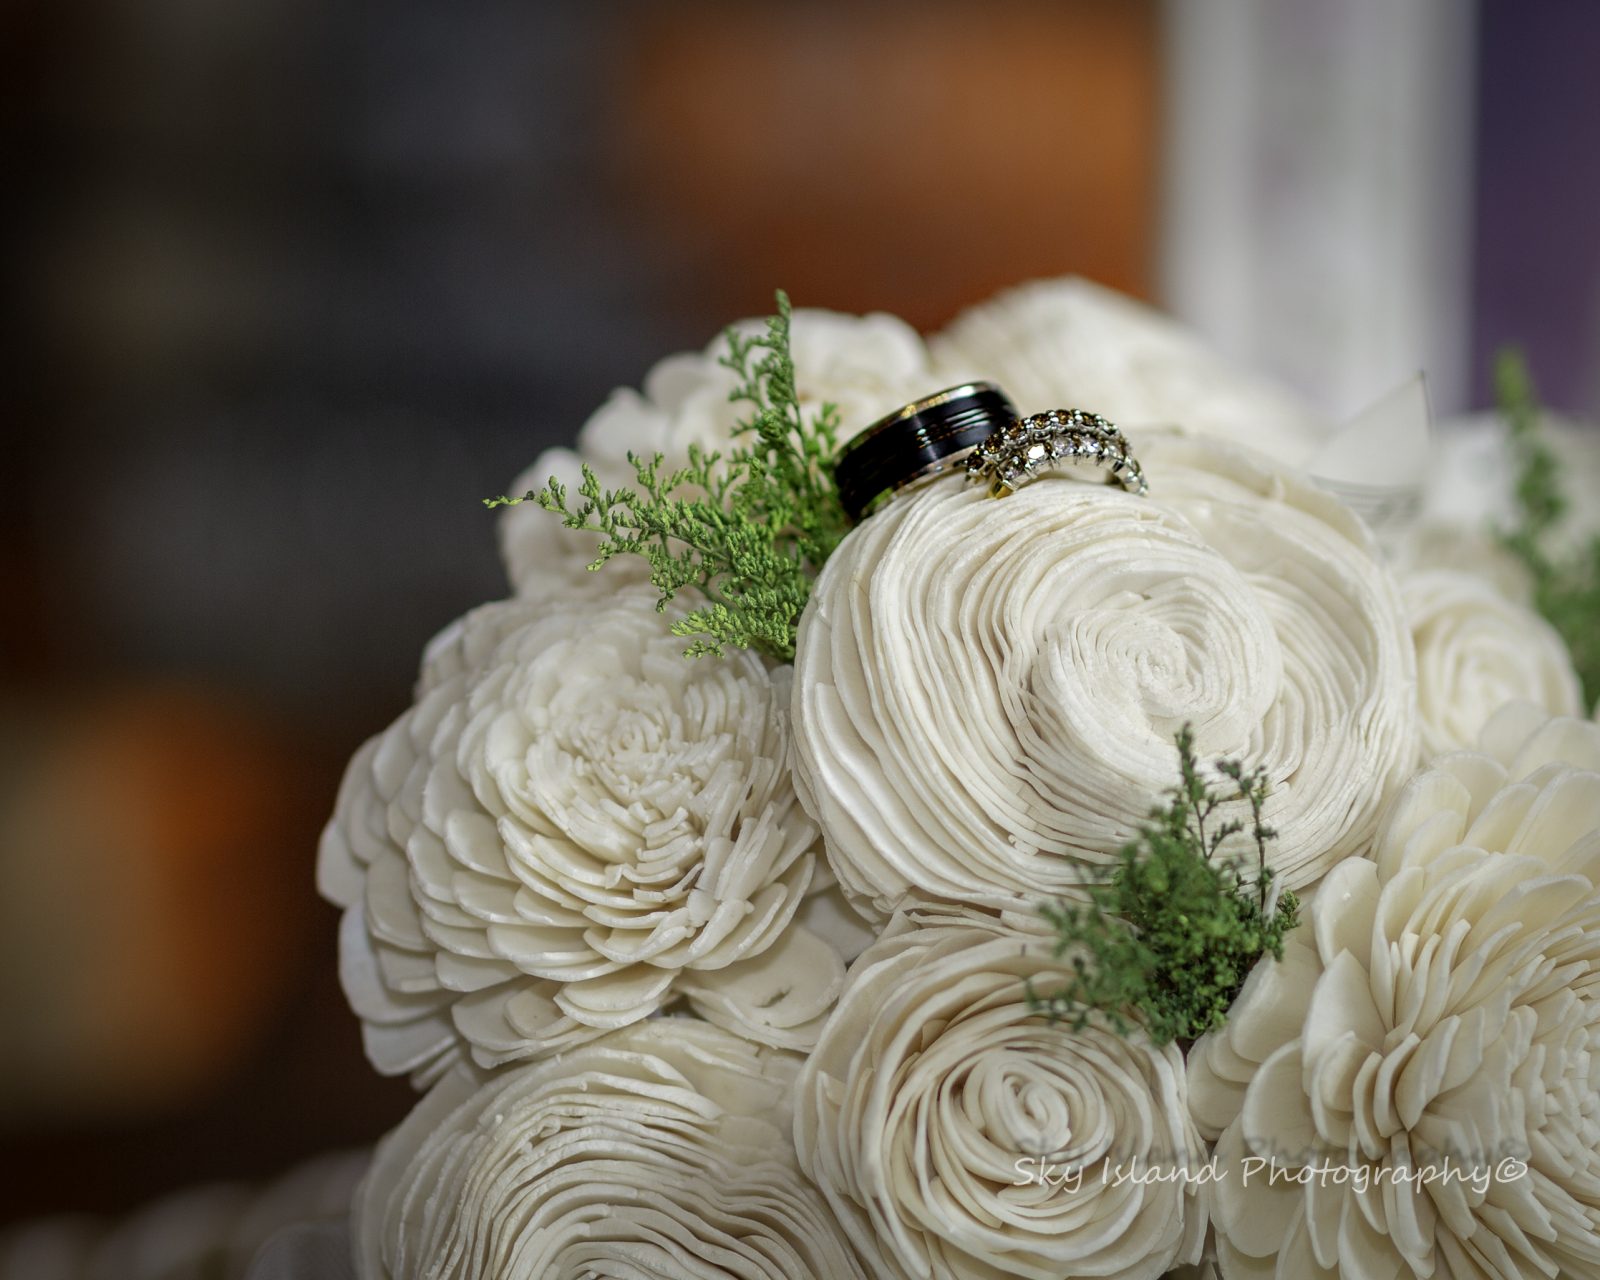 White wedding Bouquet with wedding rings Captured in Bethlehem Pa by John Heyward Sky Island Photography